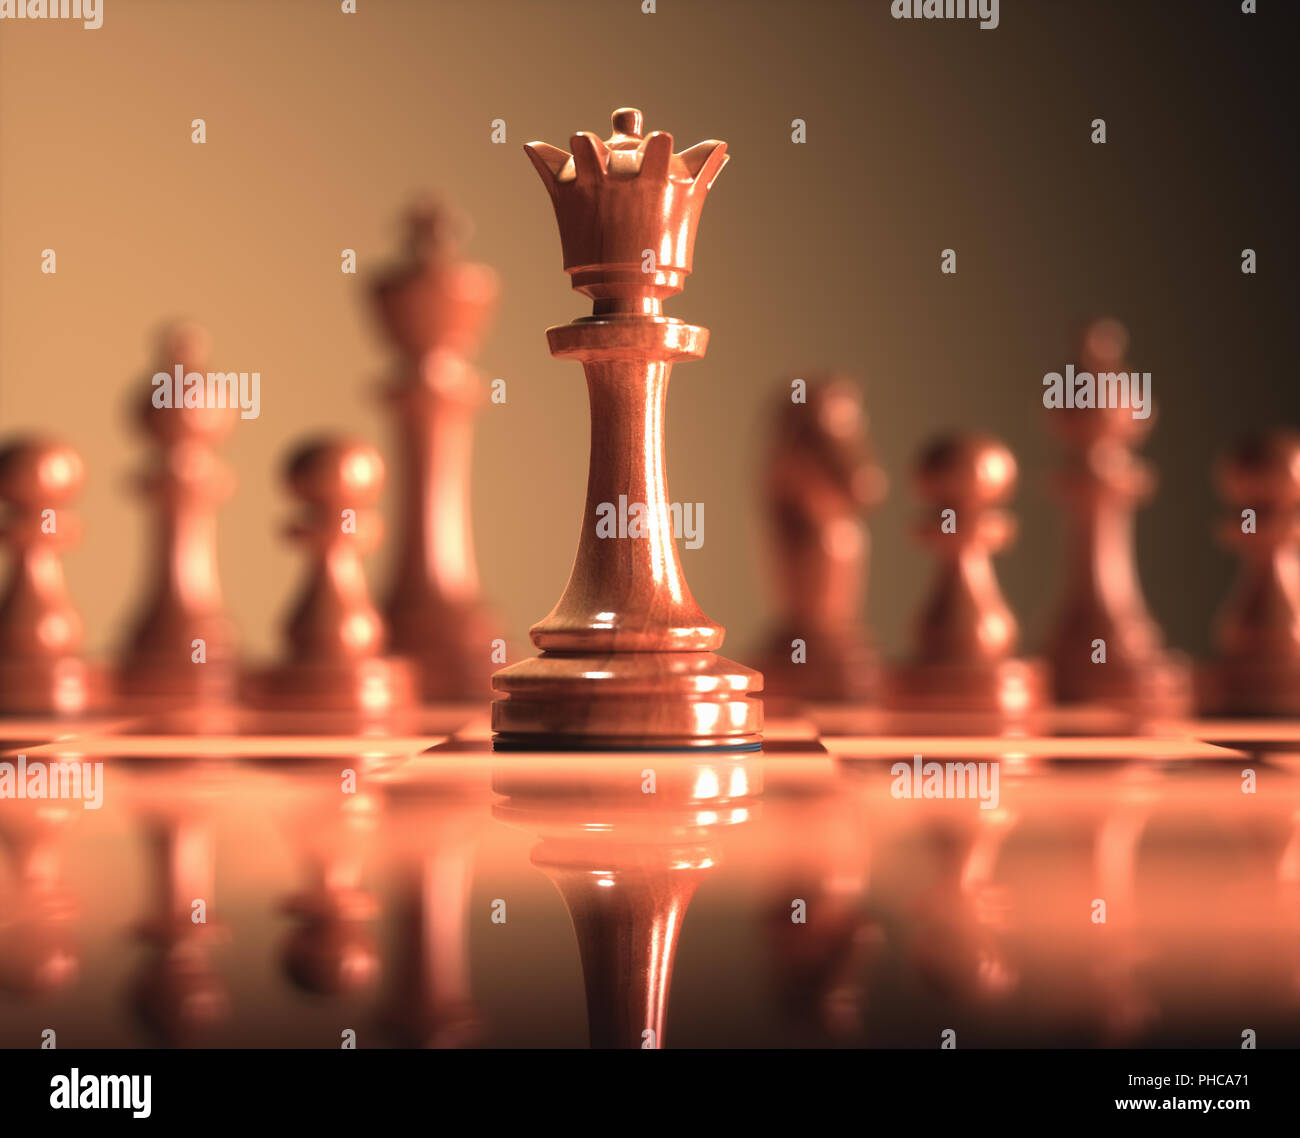 The Queen in highlight. Pieces of chess game, image with shallow depth of field. Stock Photo